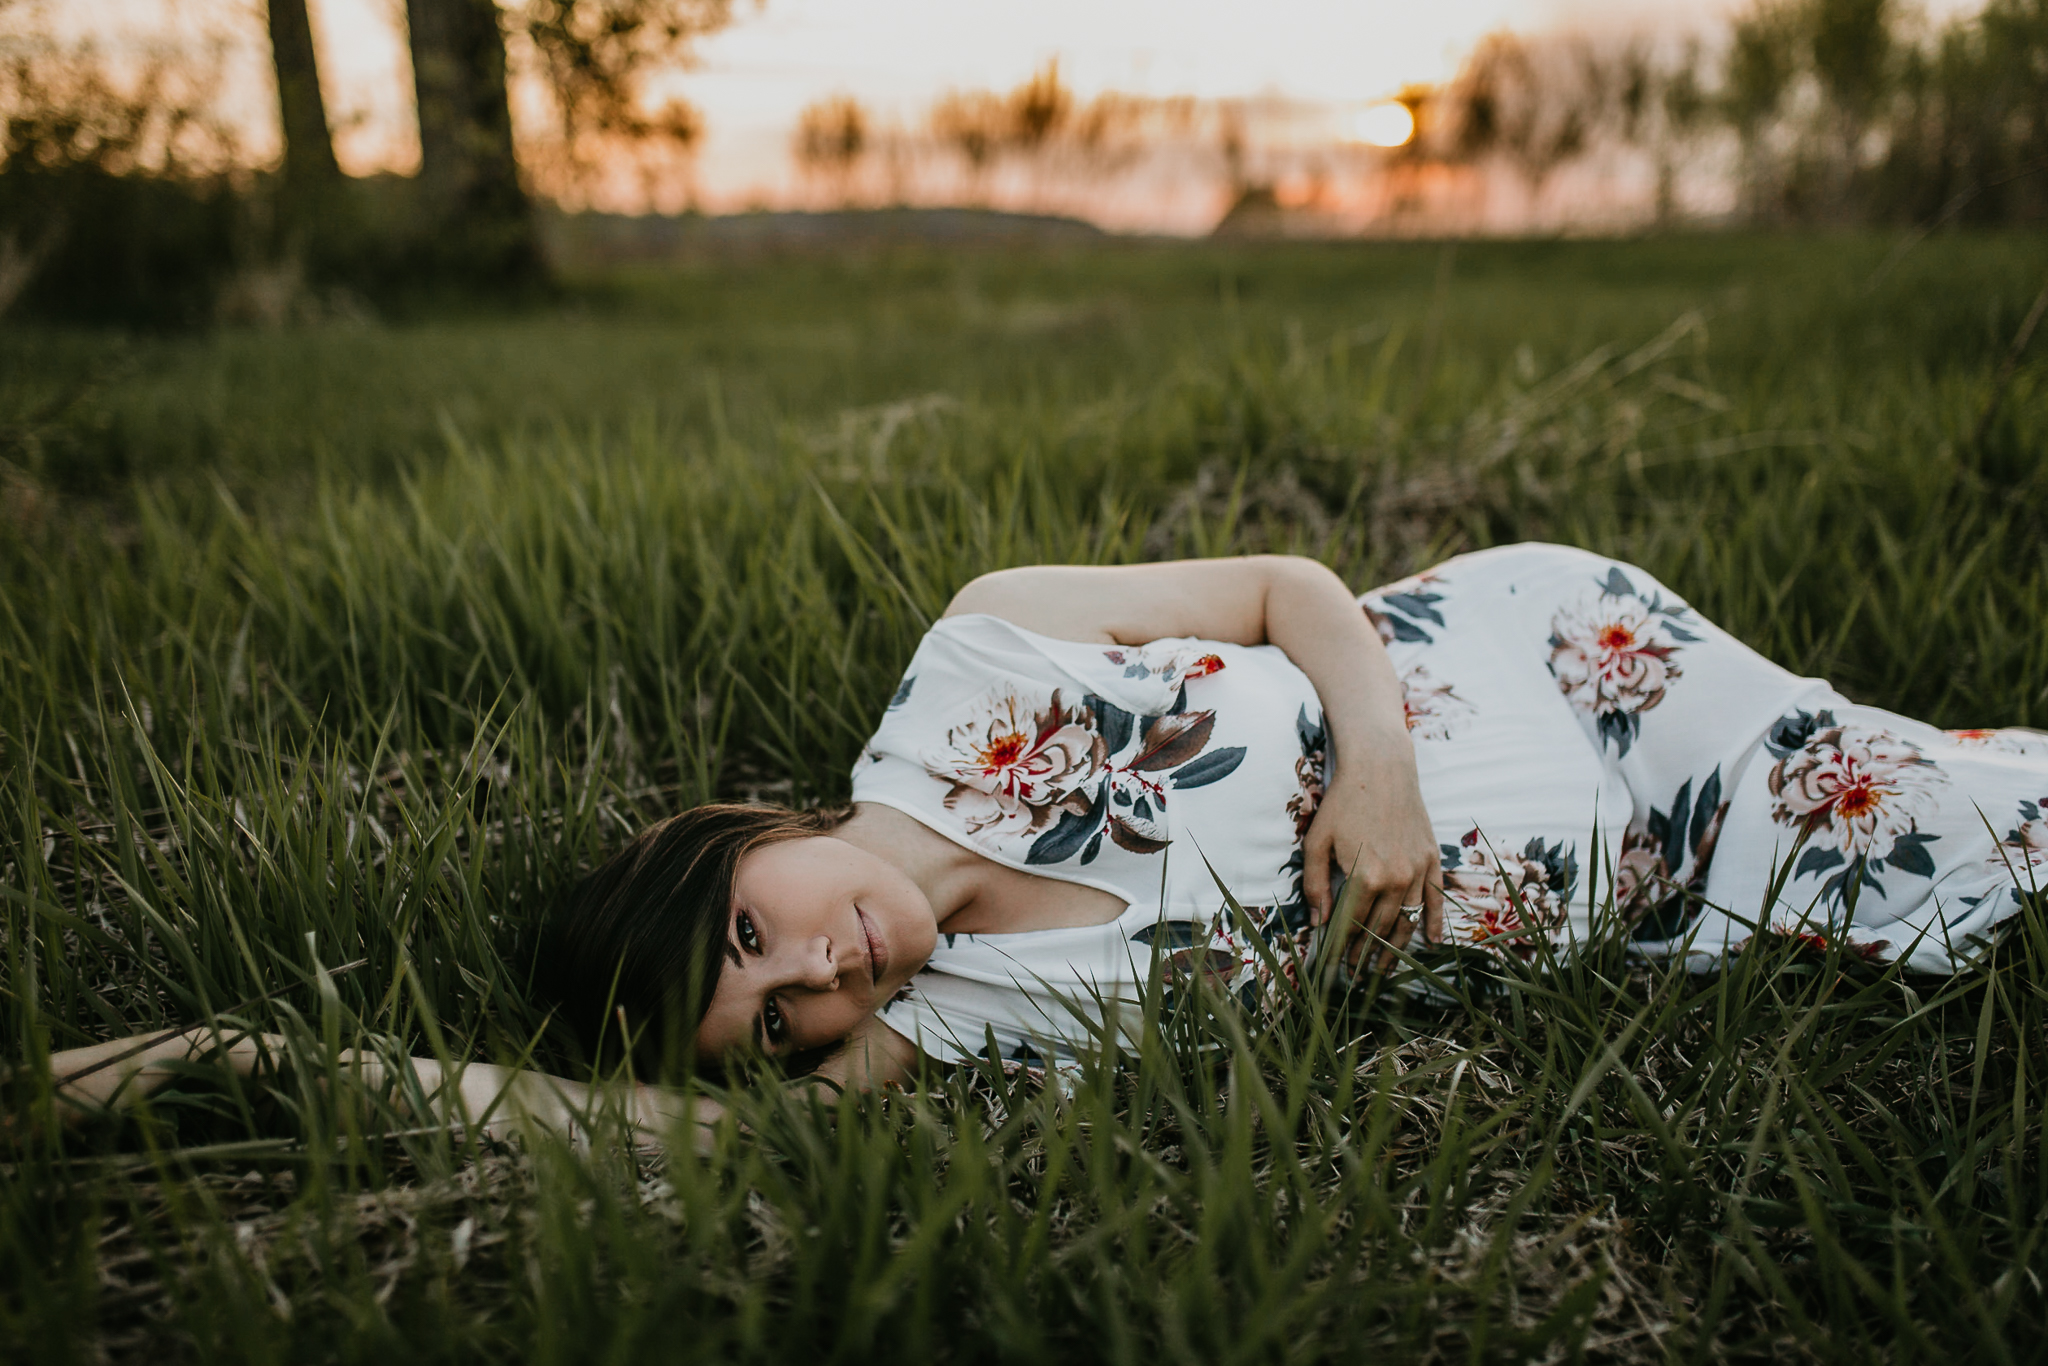 Expecting woman in a floral maxi dress laying down in a grass field during sunset.